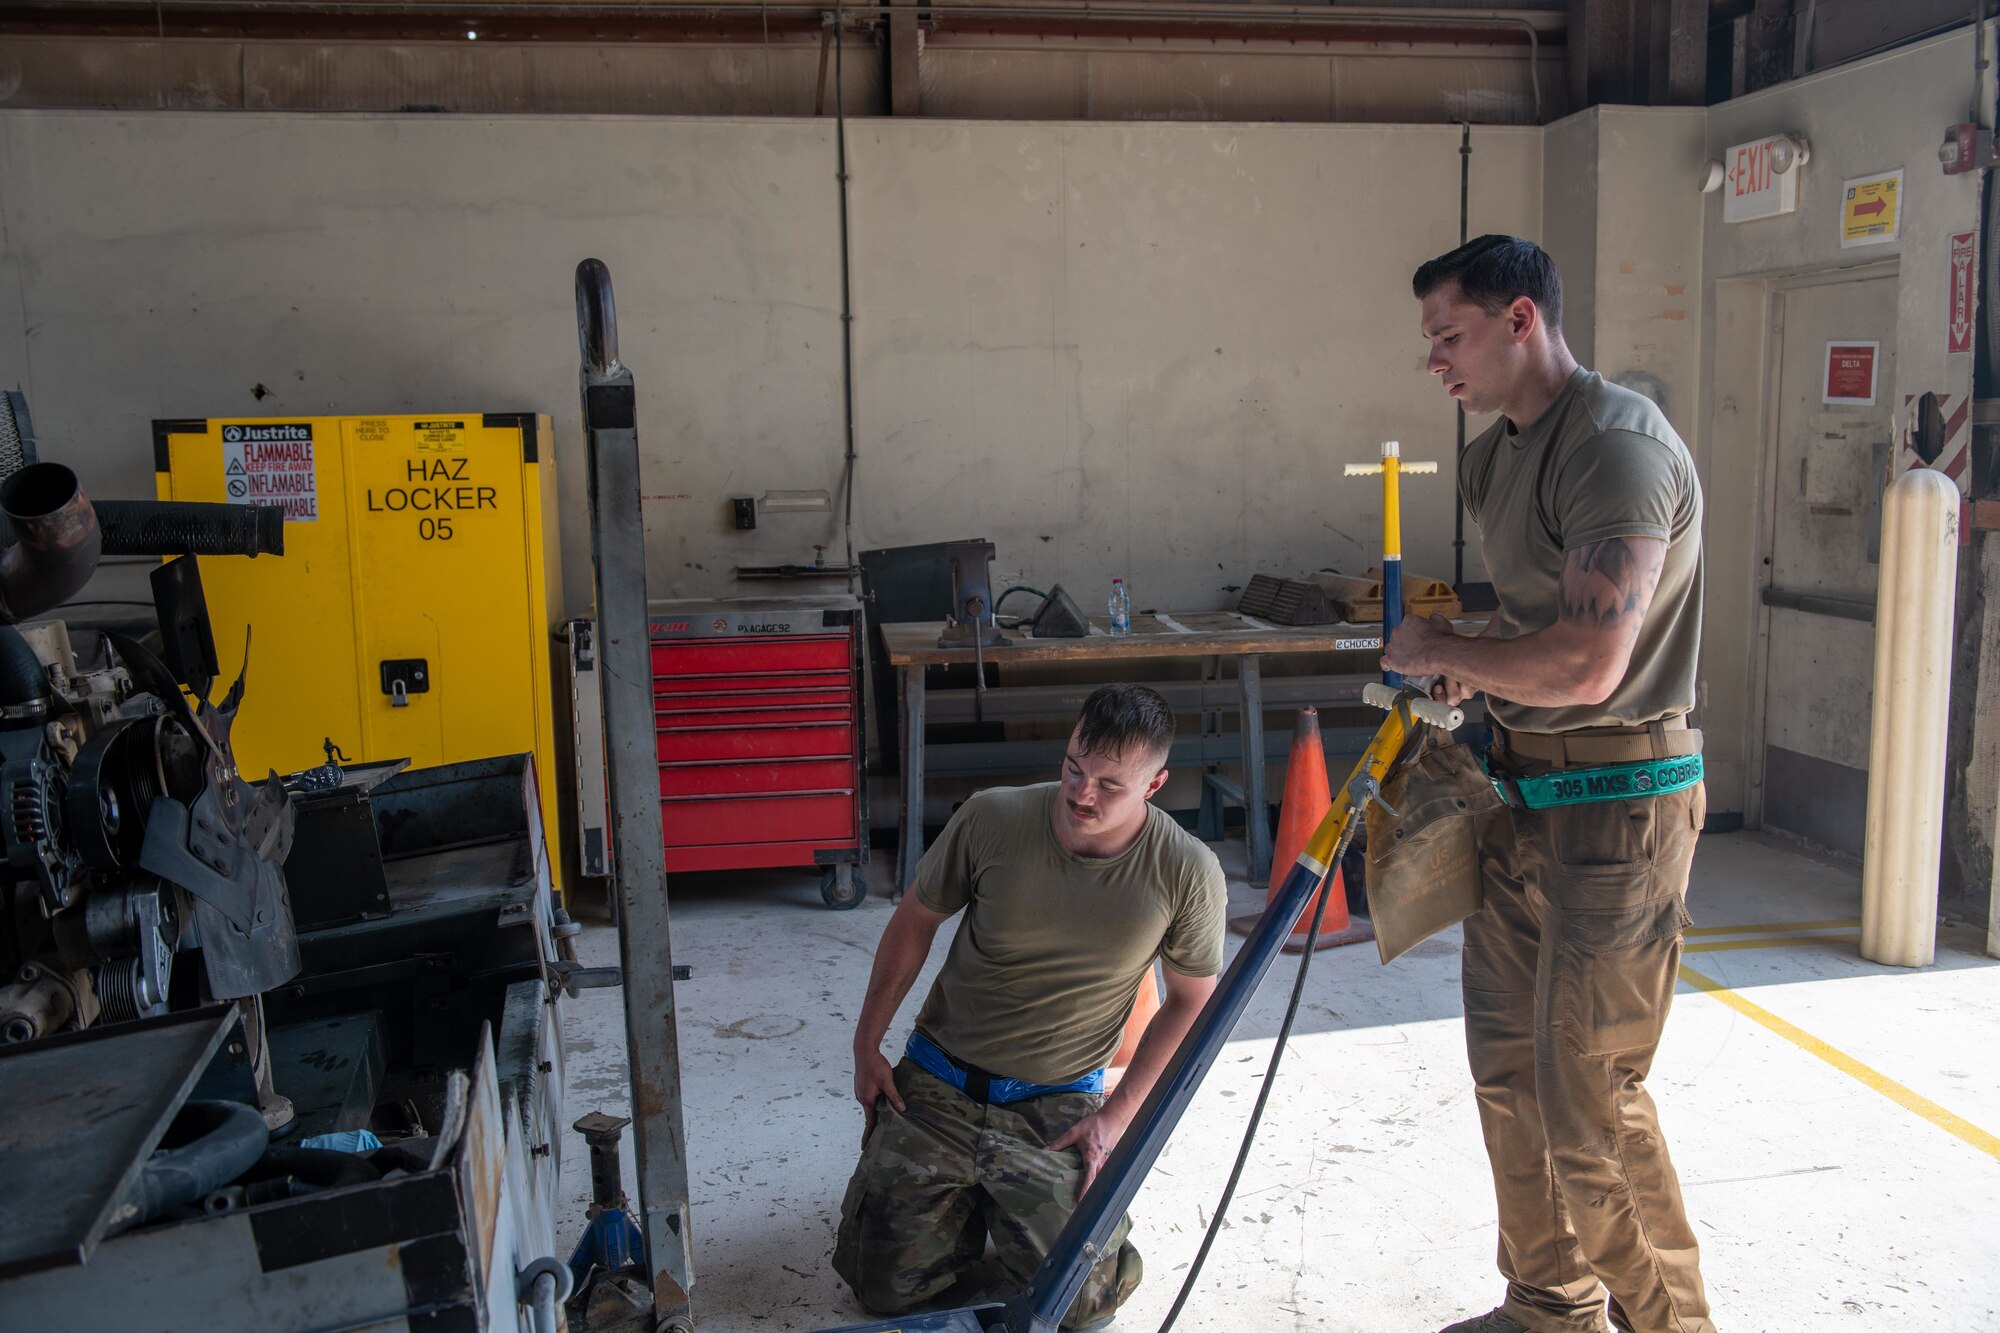 U.S. Air Force Airman 1st Class Cameron Waters and U.S. Air Force Staff Sgt. Jason Szurlej, 379th Air Expeditionary Wing Aerospace Ground Equipment Specialists, place a generator motor on jack stands on Al Udeid Air Base, Qatar, June 9, 2022. Maintenance of equipment helps to ensure its reliability on the flight line. (U.S. Air National Guard photo by Airman 1st Class Constantine Bambakidis)